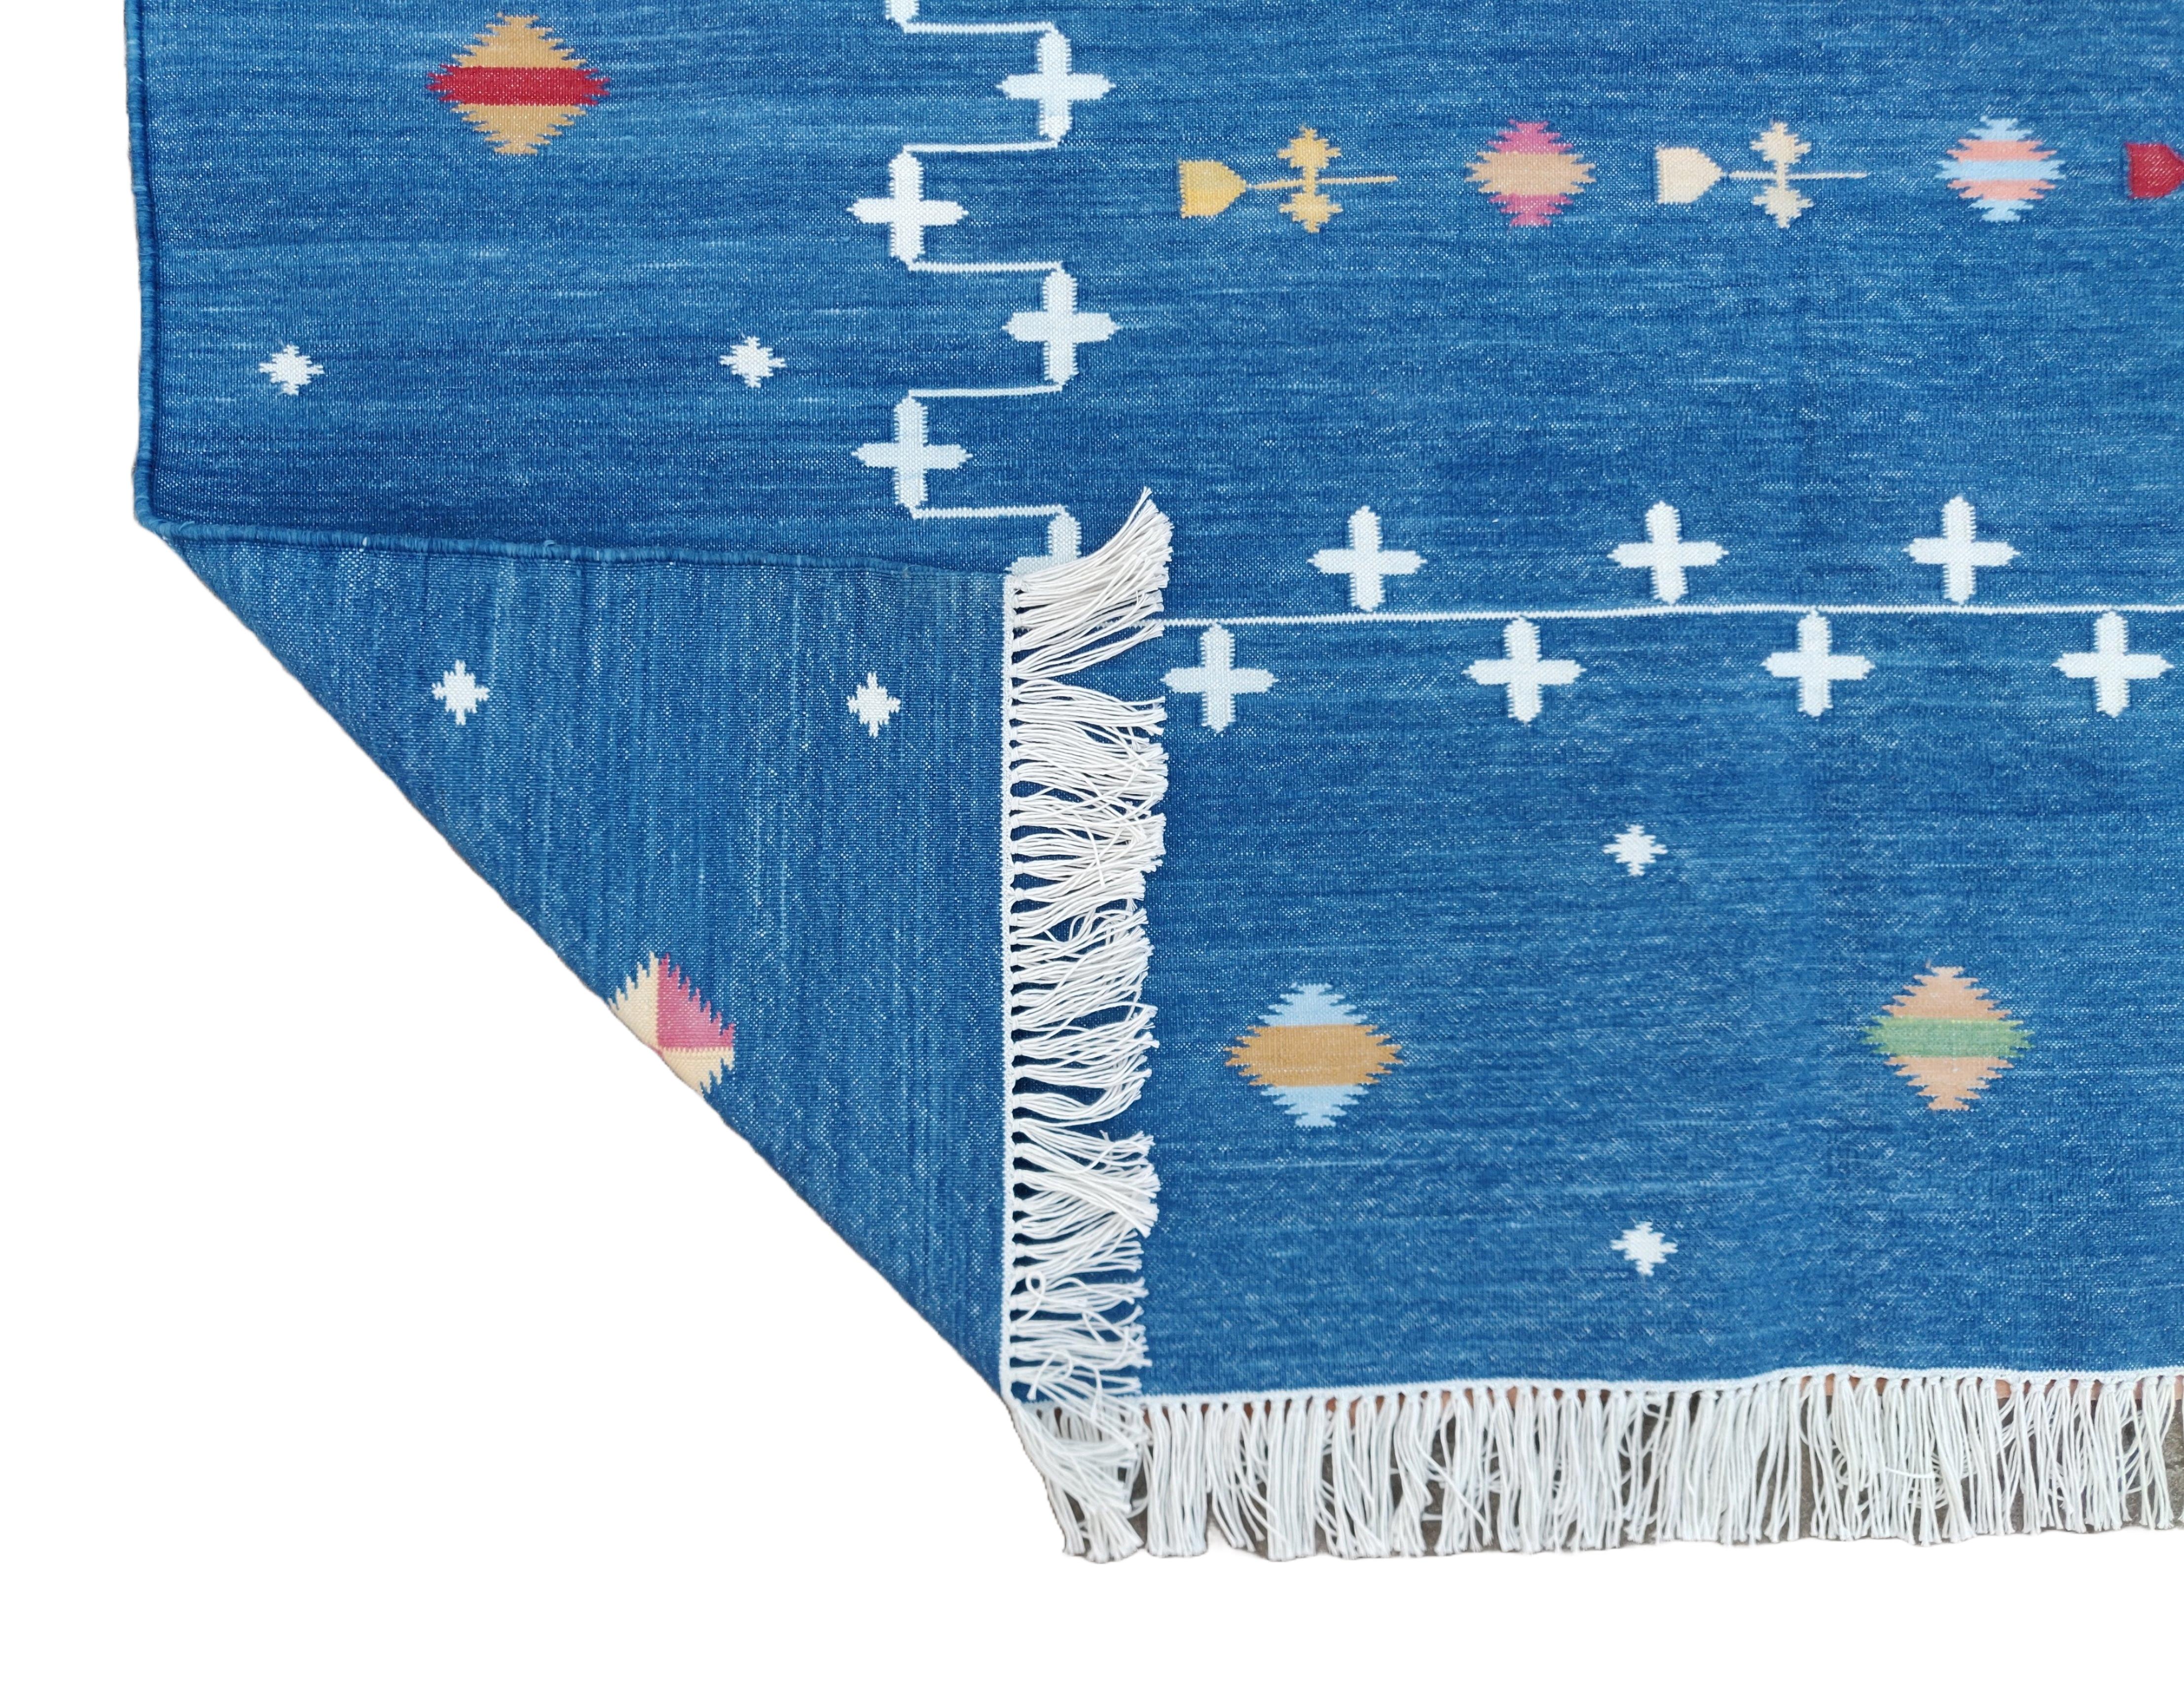 Cotton Vegetable Dyed Reversible Indigo Blue And White Indian Shooting Star Rug - 9'x12'
These special flat-weave dhurries are hand-woven with 15 ply 100% cotton yarn. Due to the special manufacturing techniques used to create our rugs, the size and